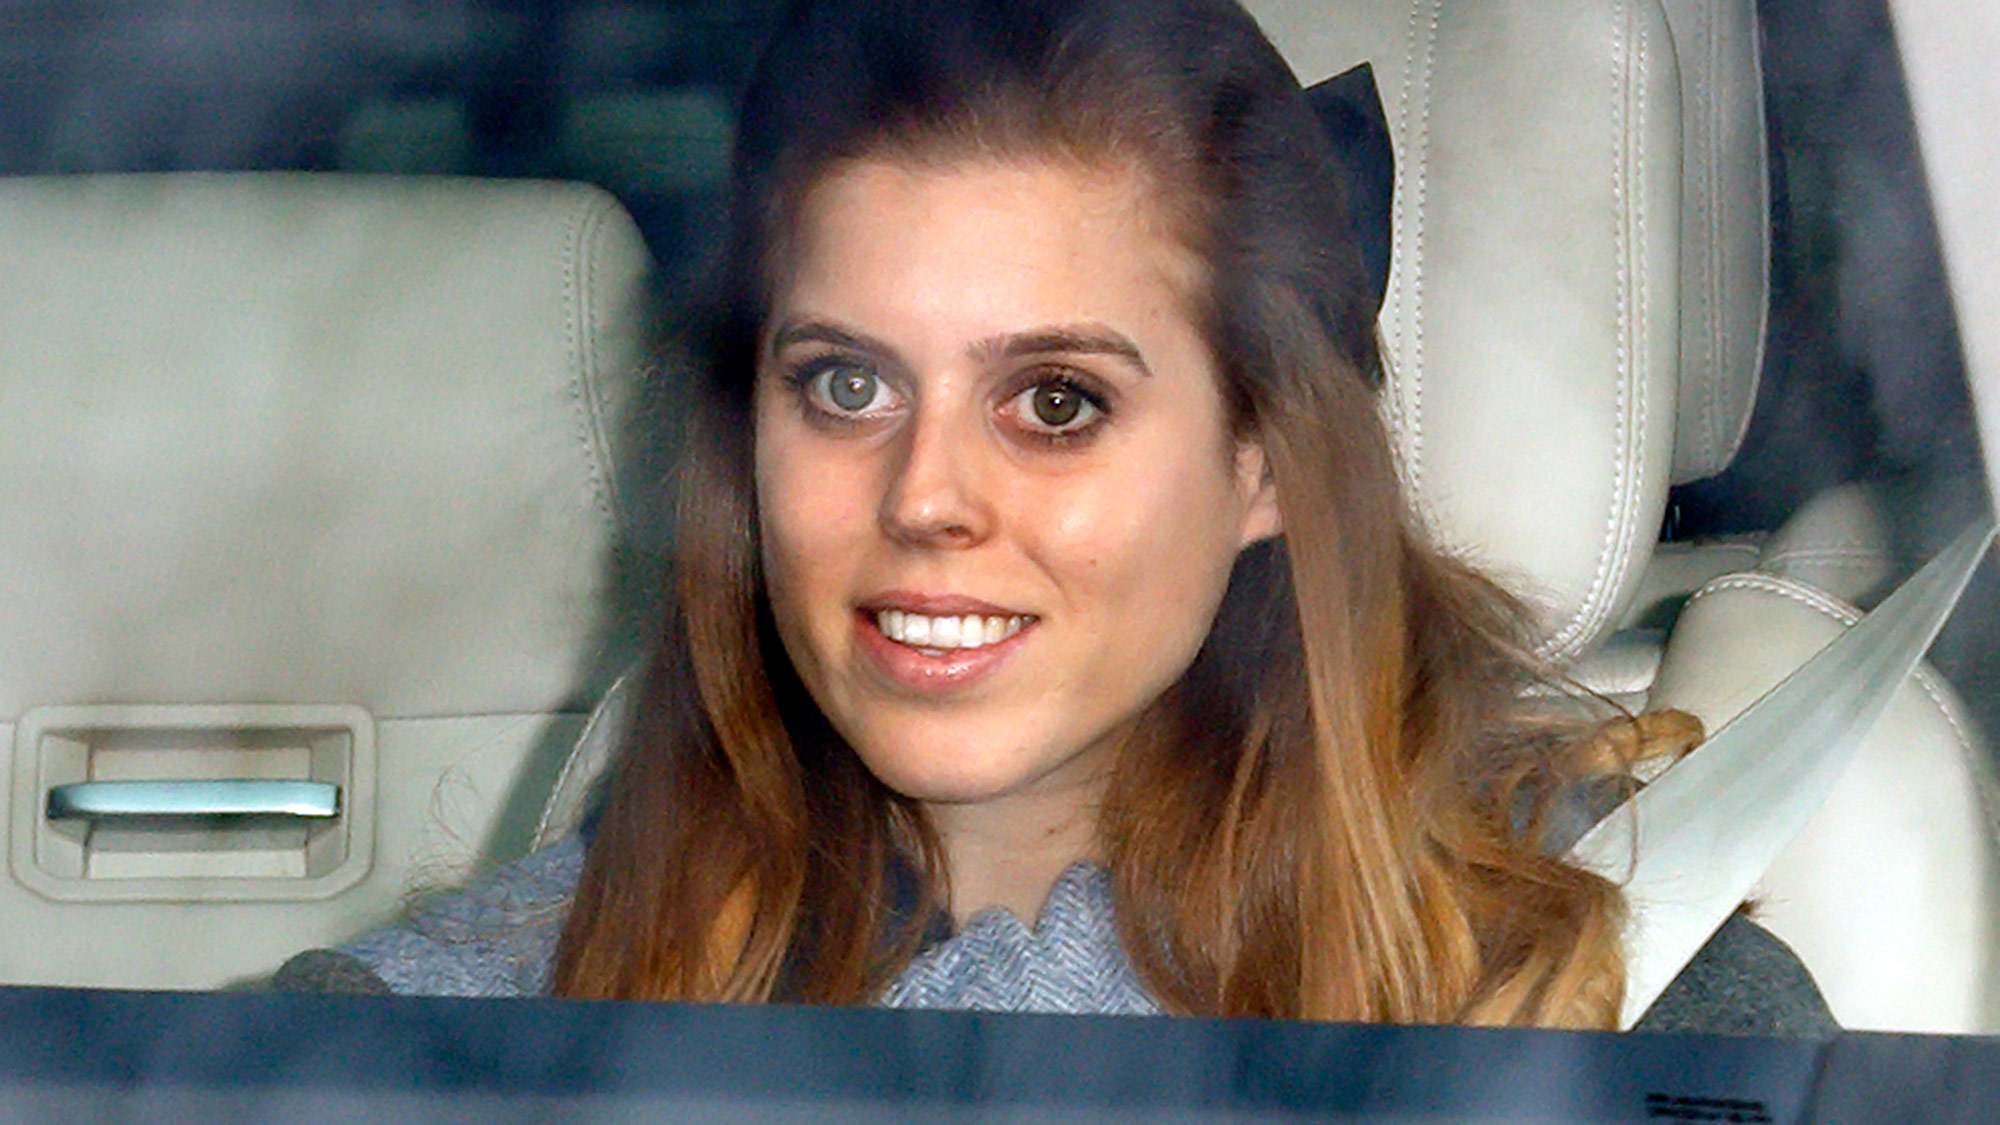 The outfit Princess Beatrice wore the night before her wedding is very laid back